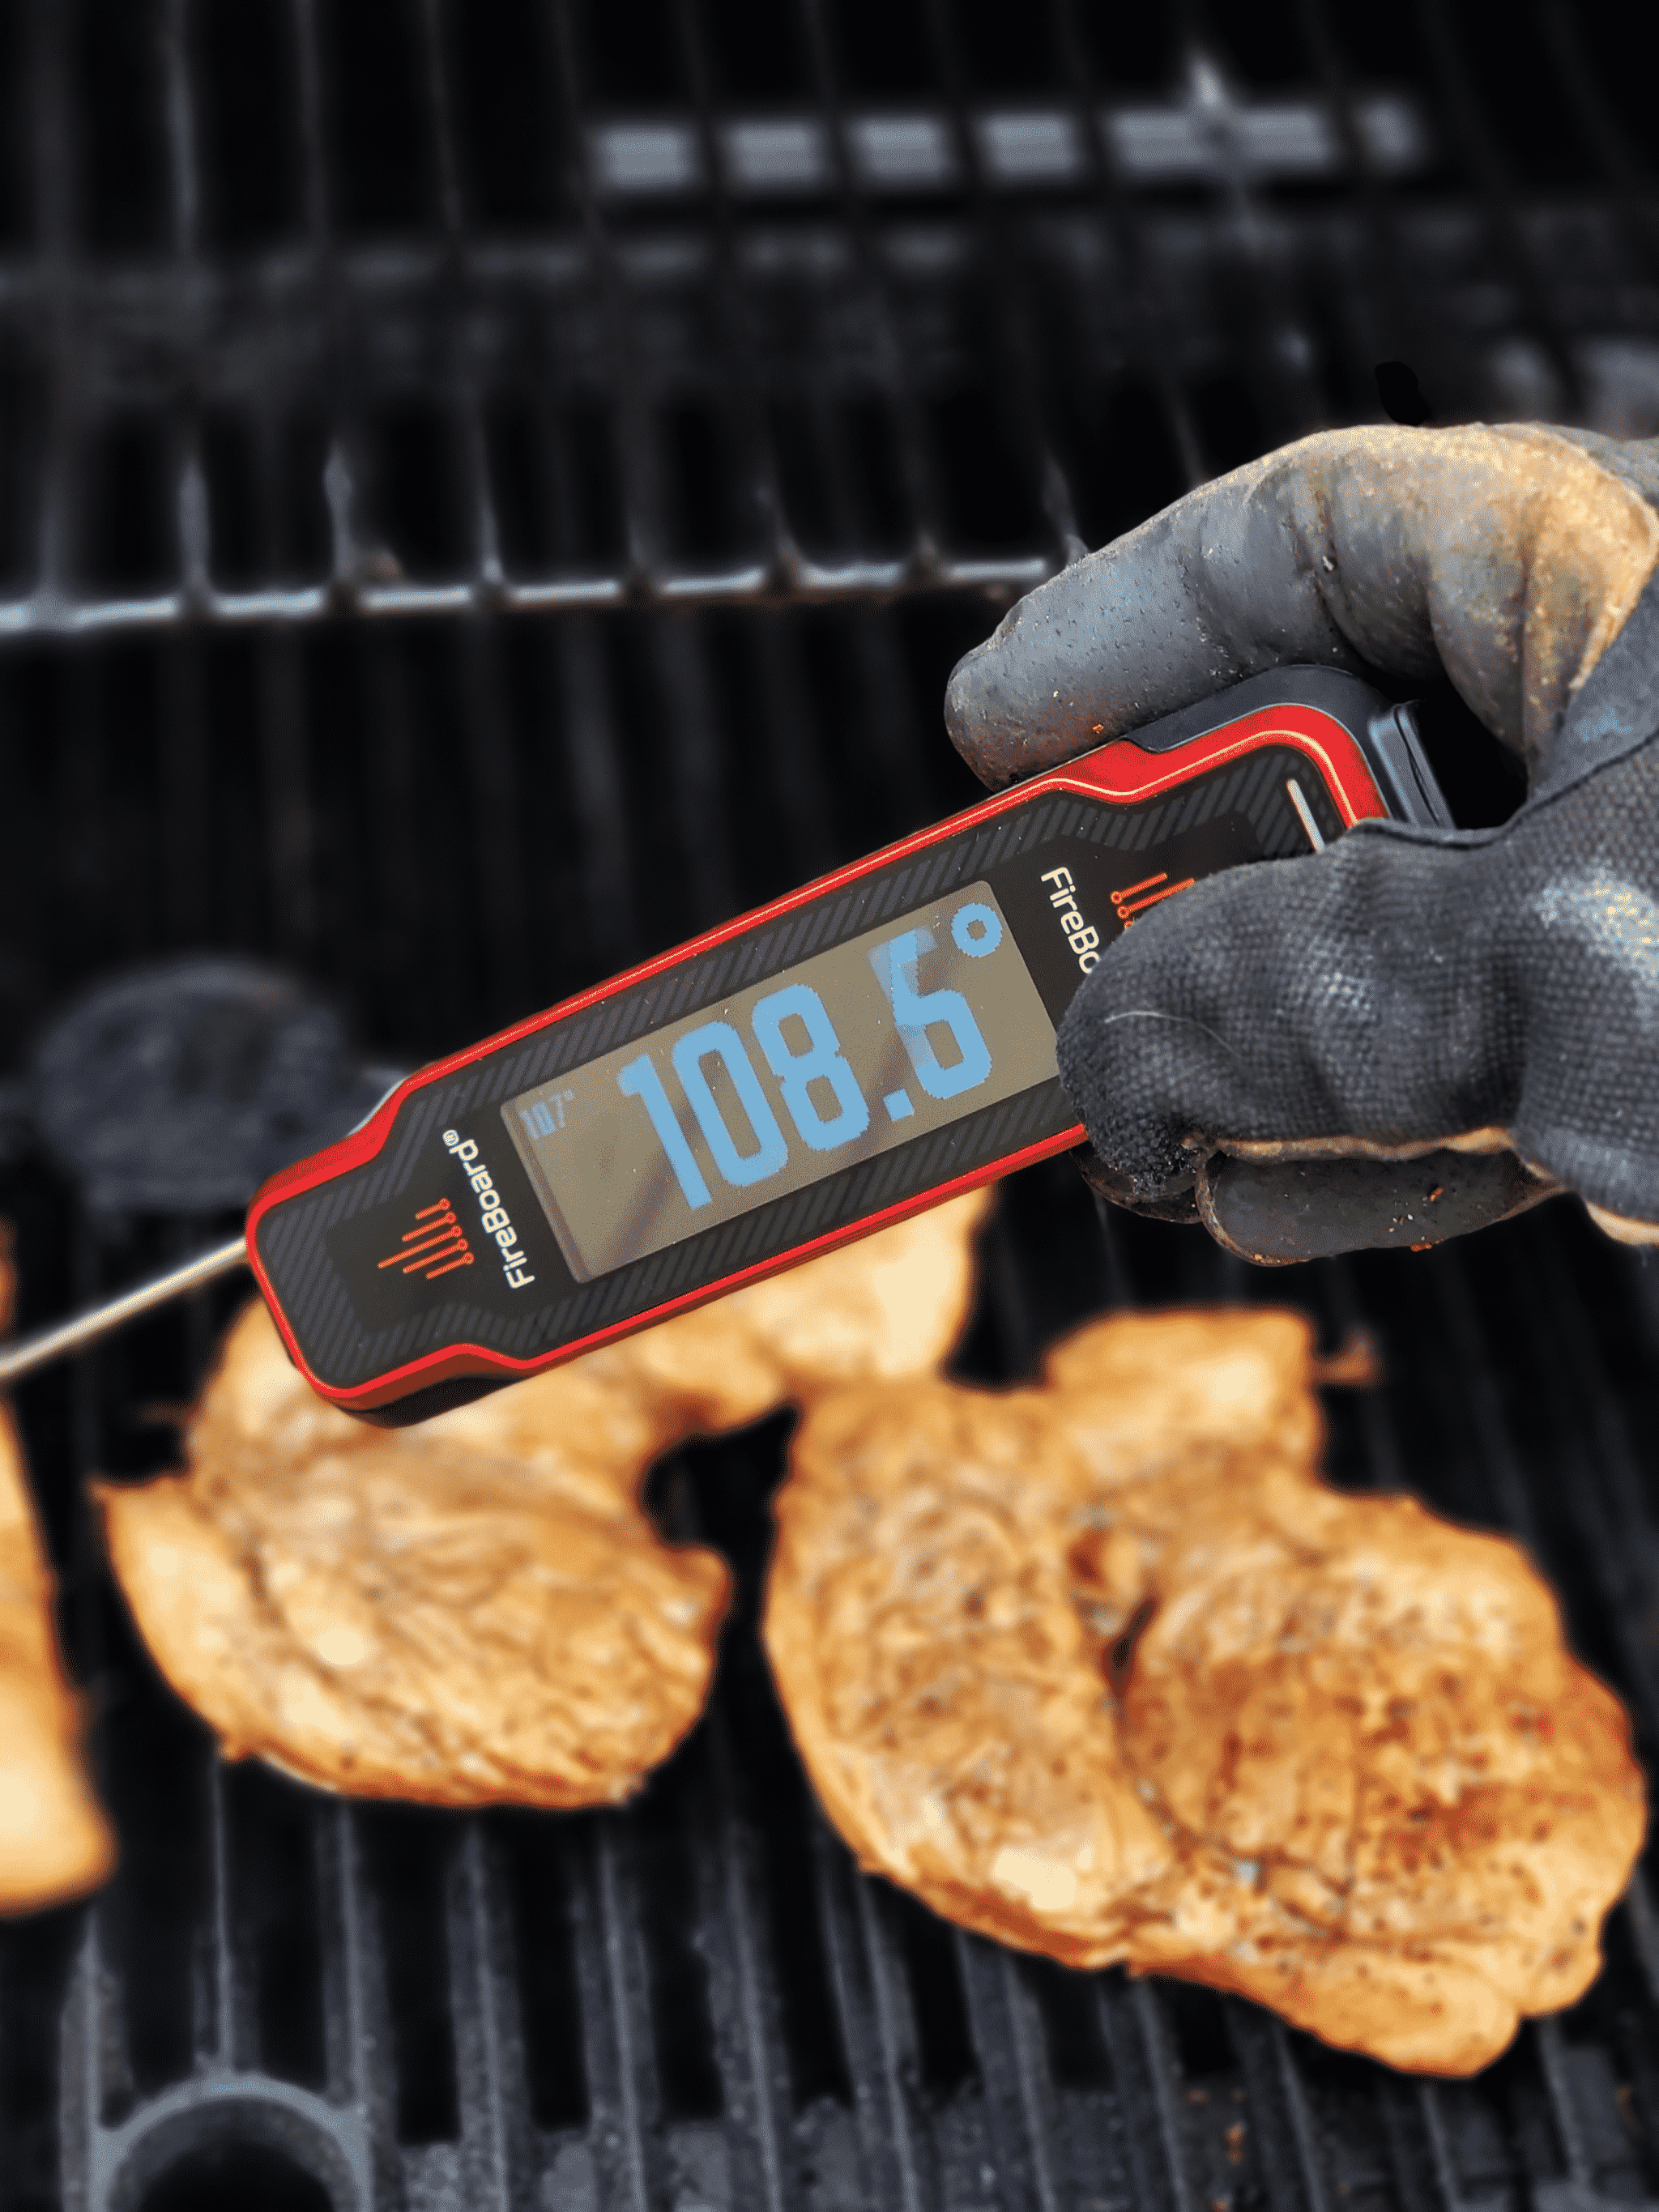 thermometer showing 108 degrees in food